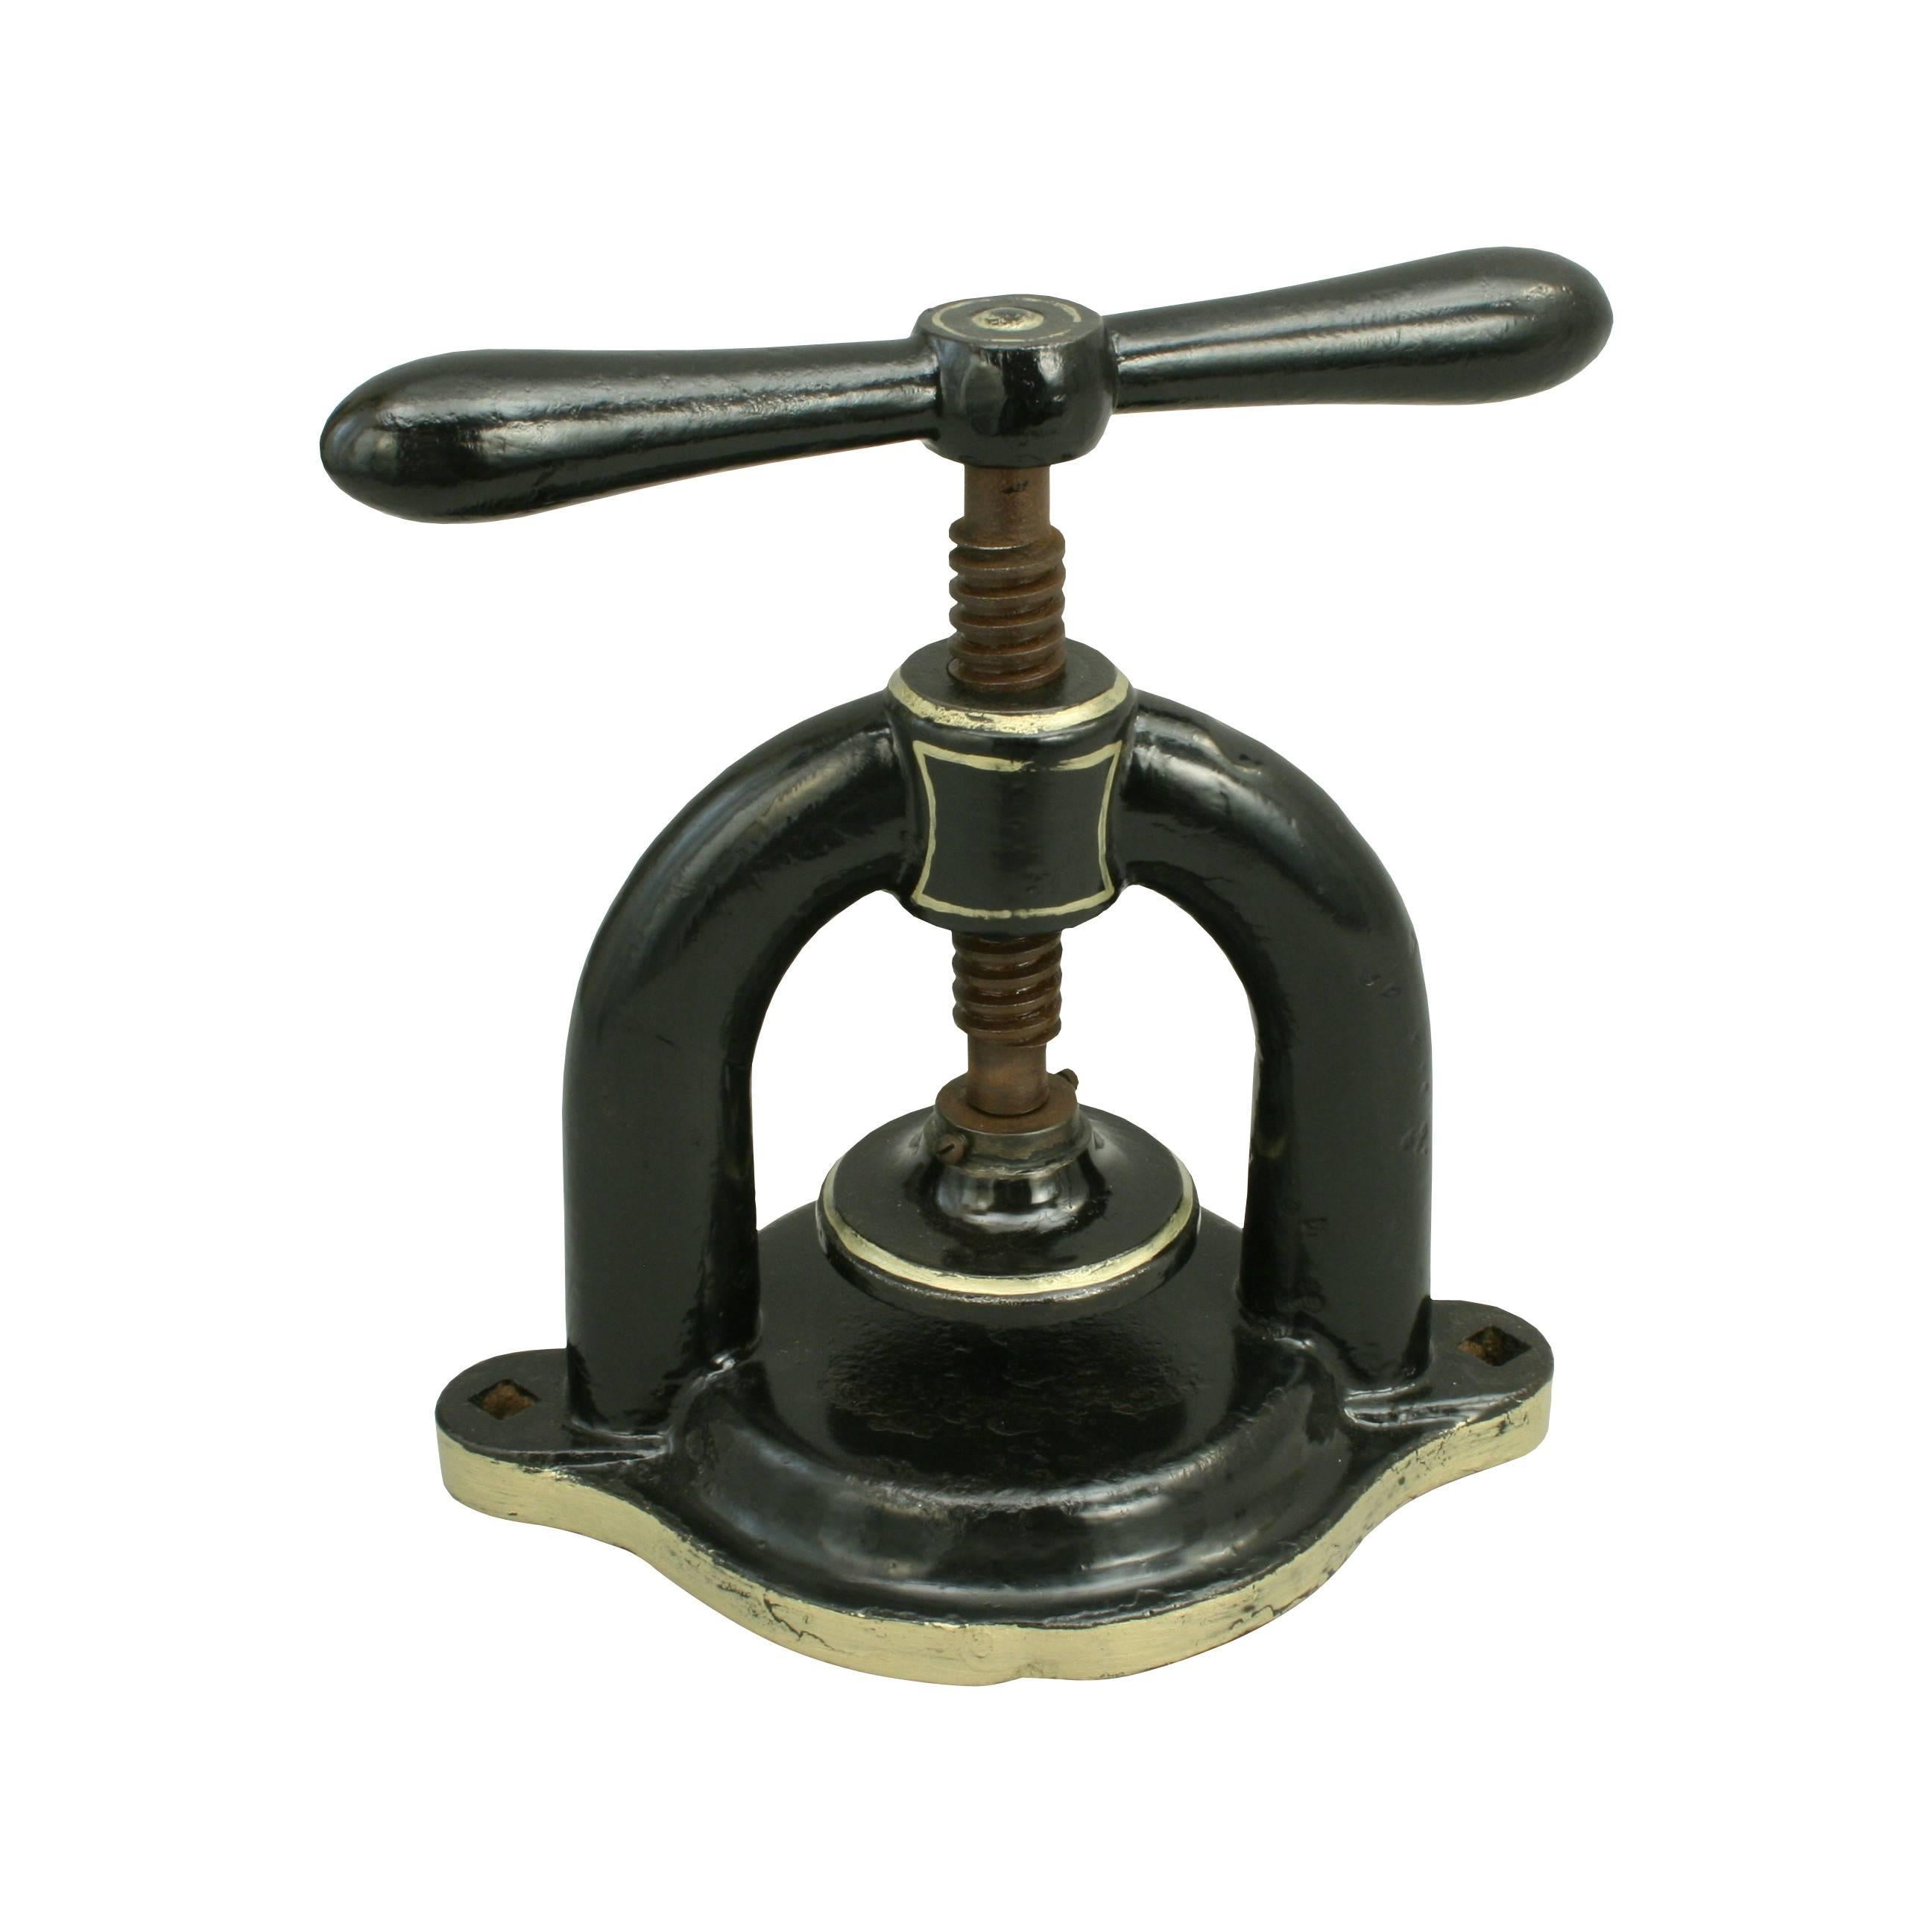 A heavy duty cast iron gutty golf ball press for early golf ball moulds. The tap handled screw down press is horse shoe shaped and is for mounting onto a work bench. To make a gutty golf ball first the gutta-percha was heated and loosely rolled into